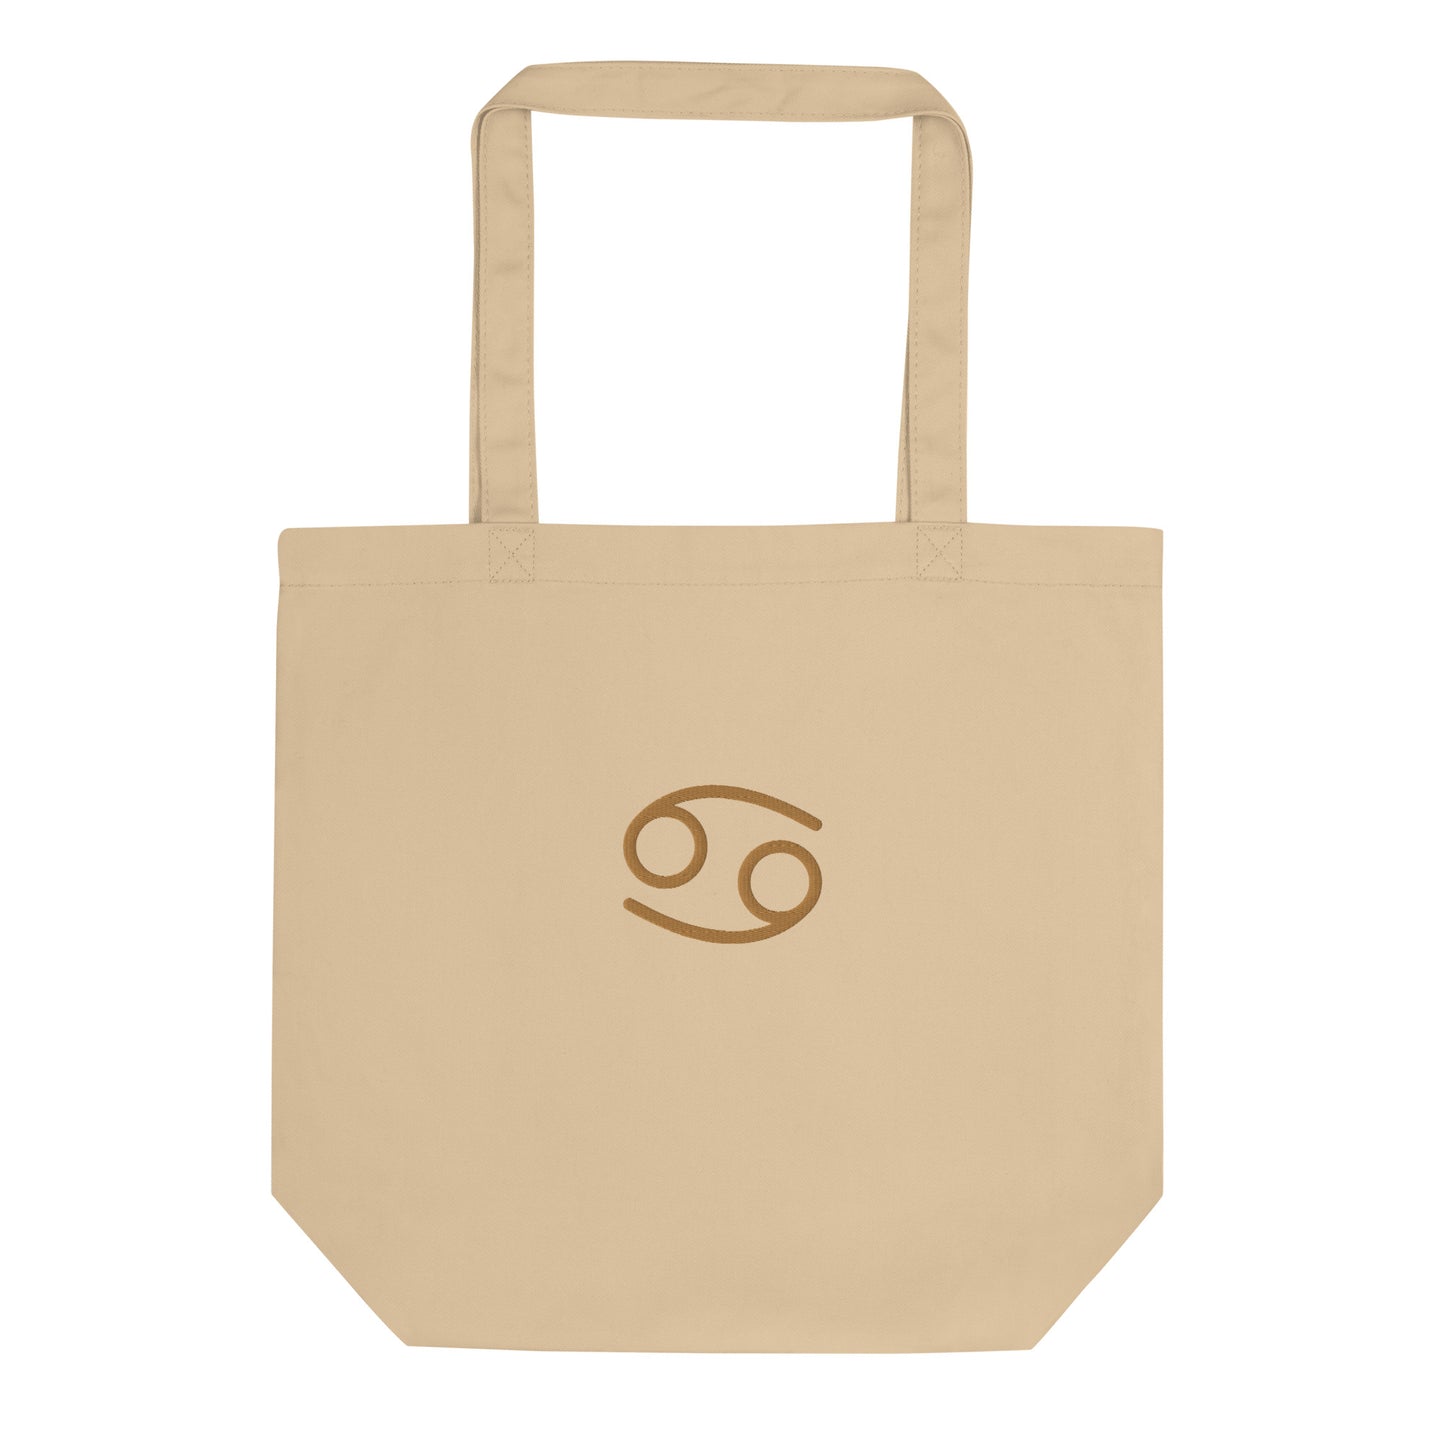 Cancer - Small Open Tote Bag - Gold Thread